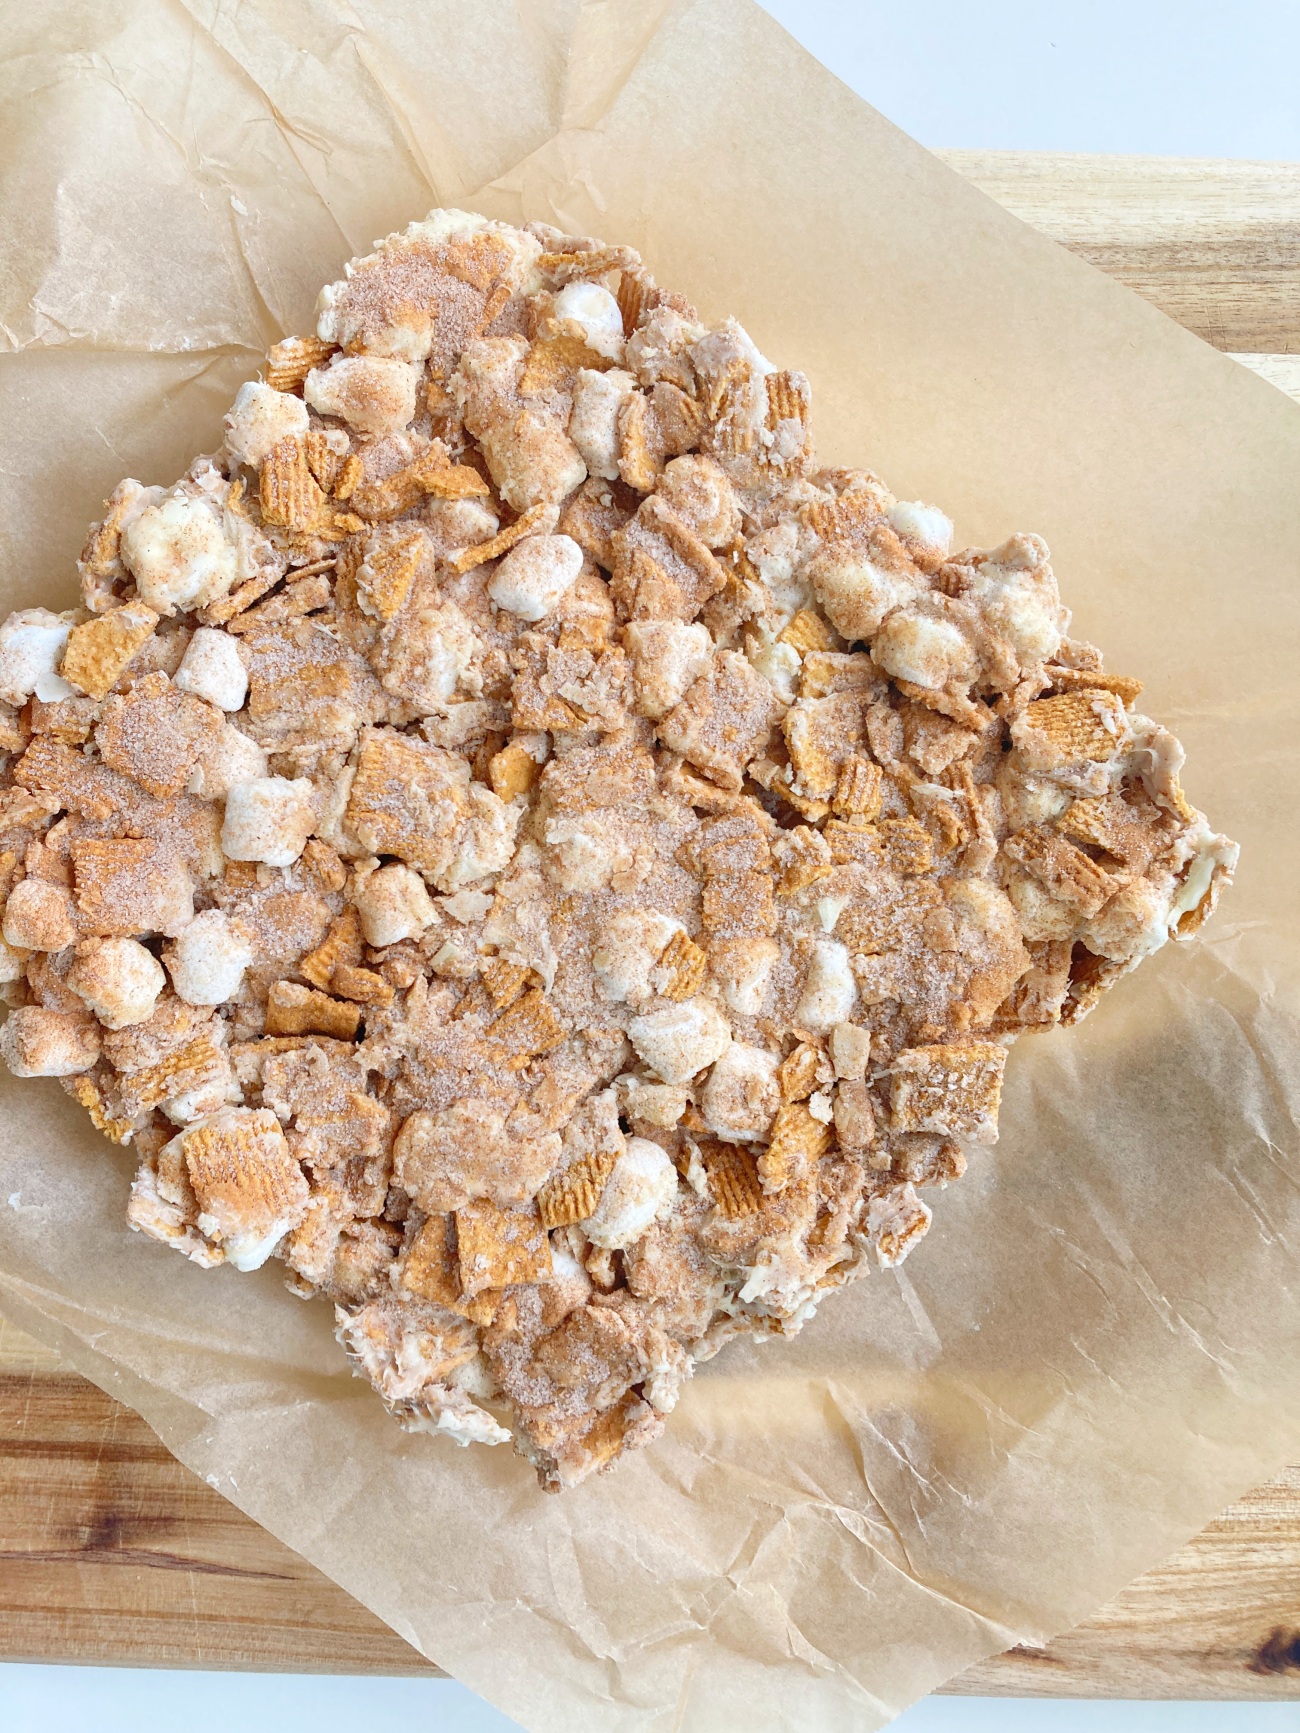 Combine remaining cinnamon and sugar and sprinkle over top before bars set. Allow to chill in refrigerator for at least 30 minutes. Lift out of dish using parchment paper before cutting into 16 squares to serve.